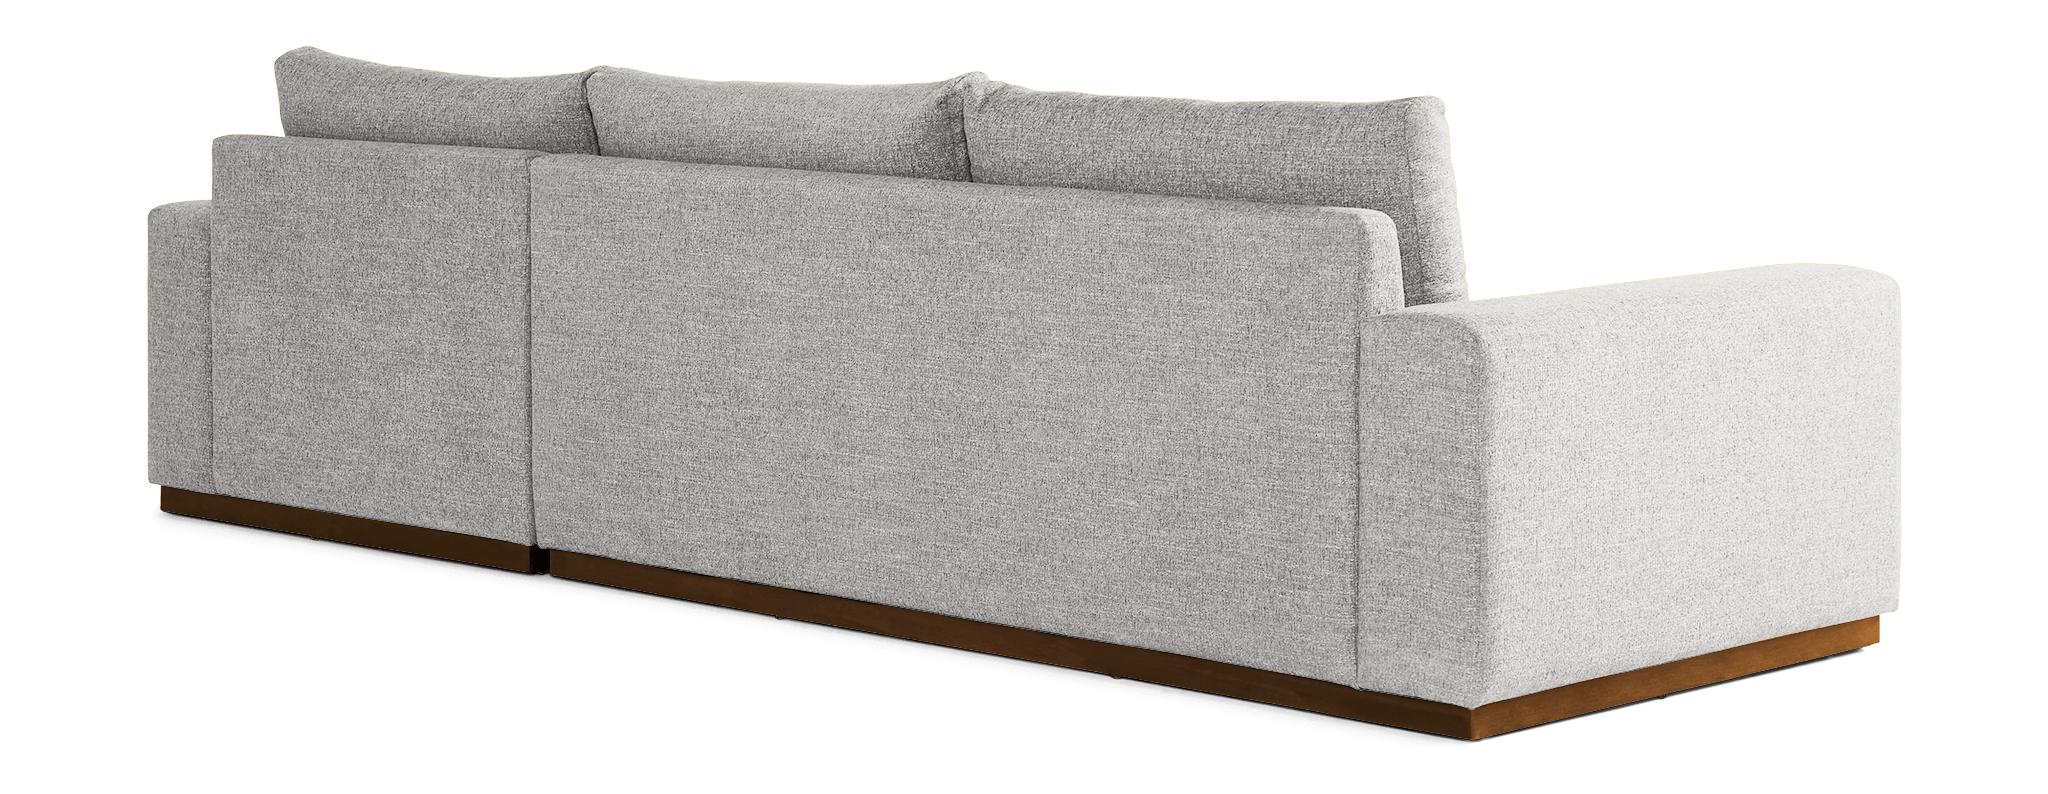 Holt Sectional with Storage - Milo Dove - Image 3